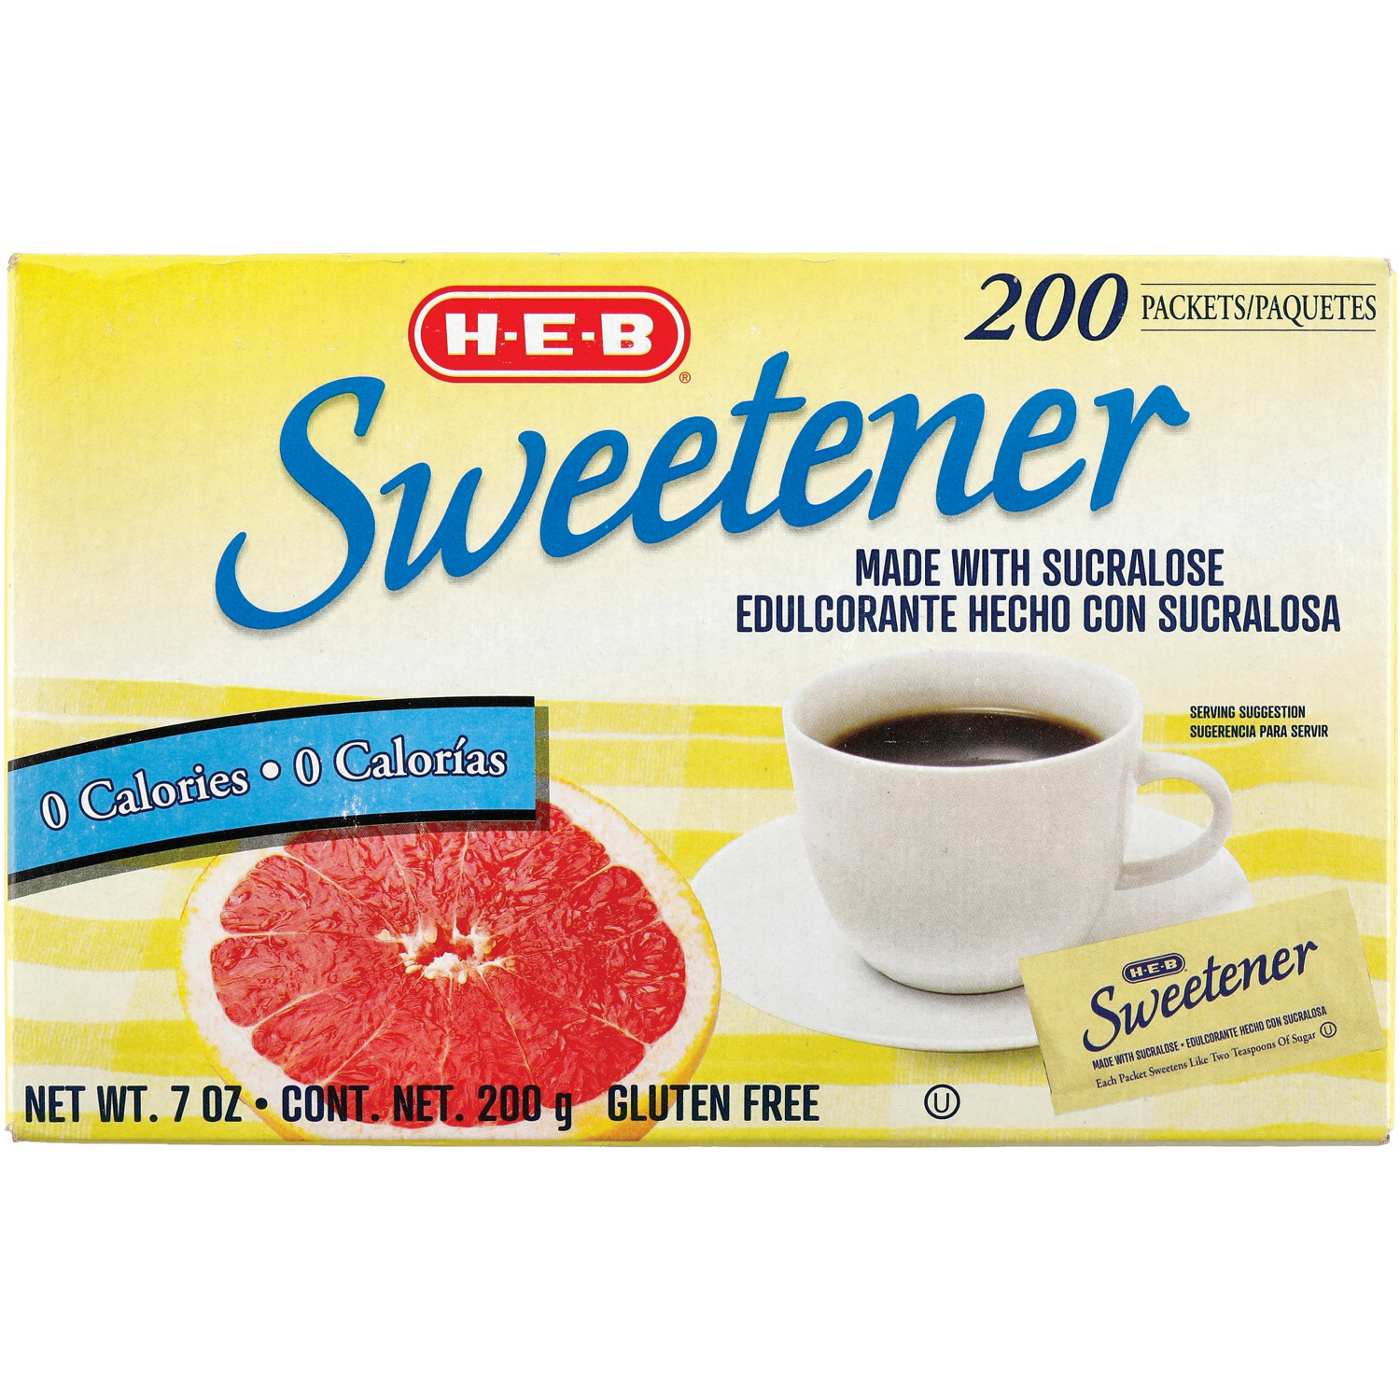 H-E-B Sucralose Sweetener Packets; image 1 of 2